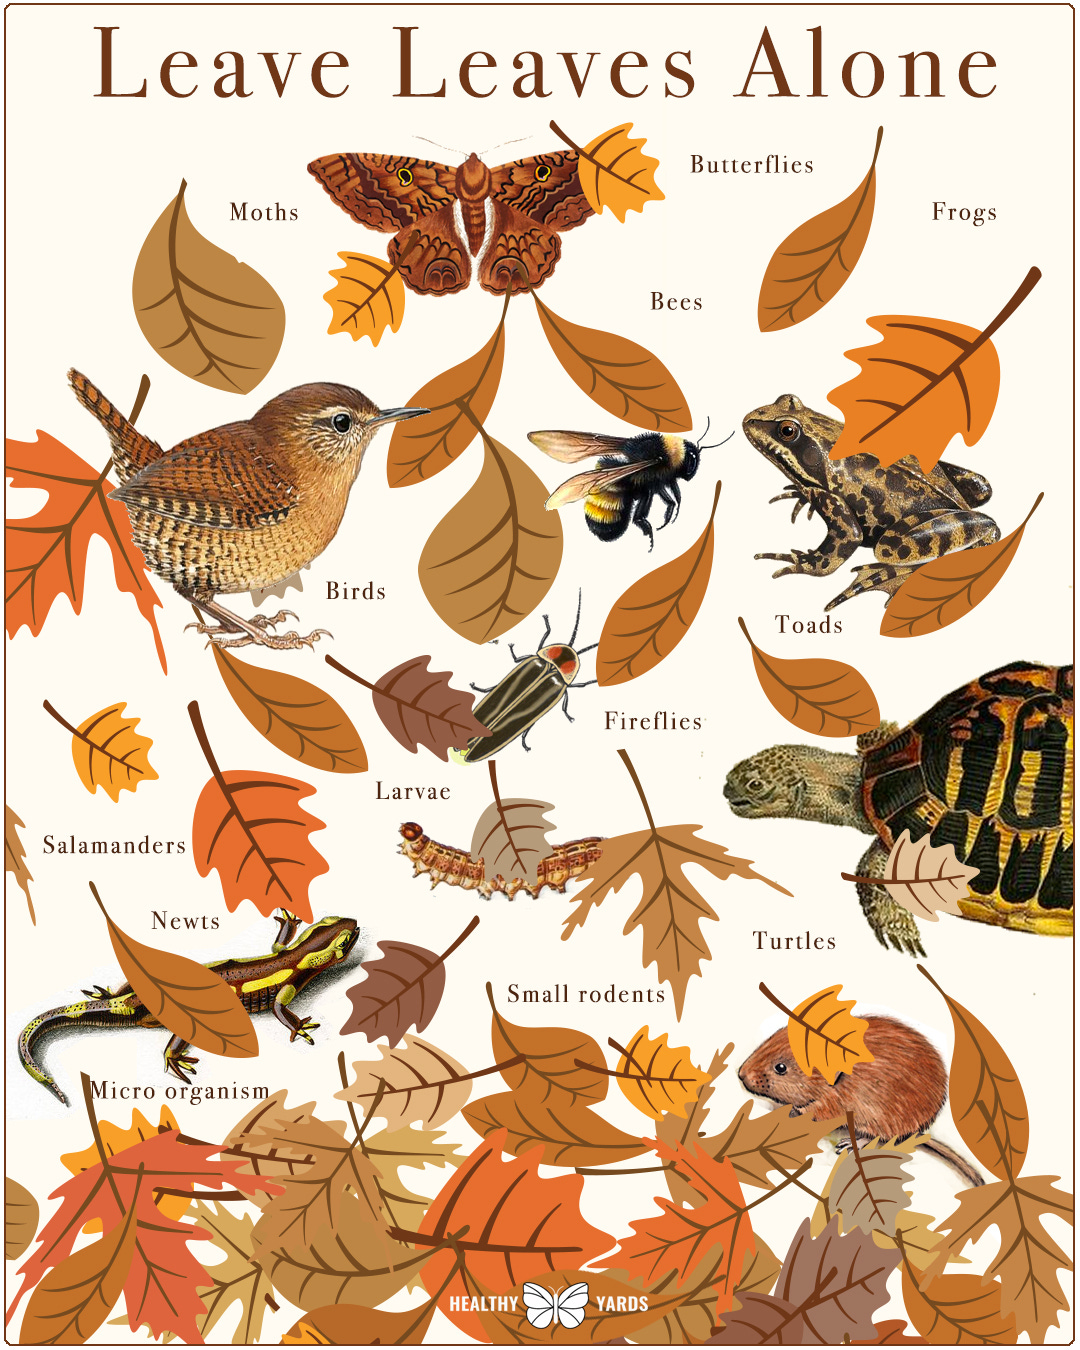 May be an image of nature and text that says 'Leave Leaves Alone Moths Butterflies Frogs Bees Birds Toads Fireflies Larvae Salamanders Newts mAR Turtles Small Smallrodents rodents Micro organism HEALTHY YARDS'